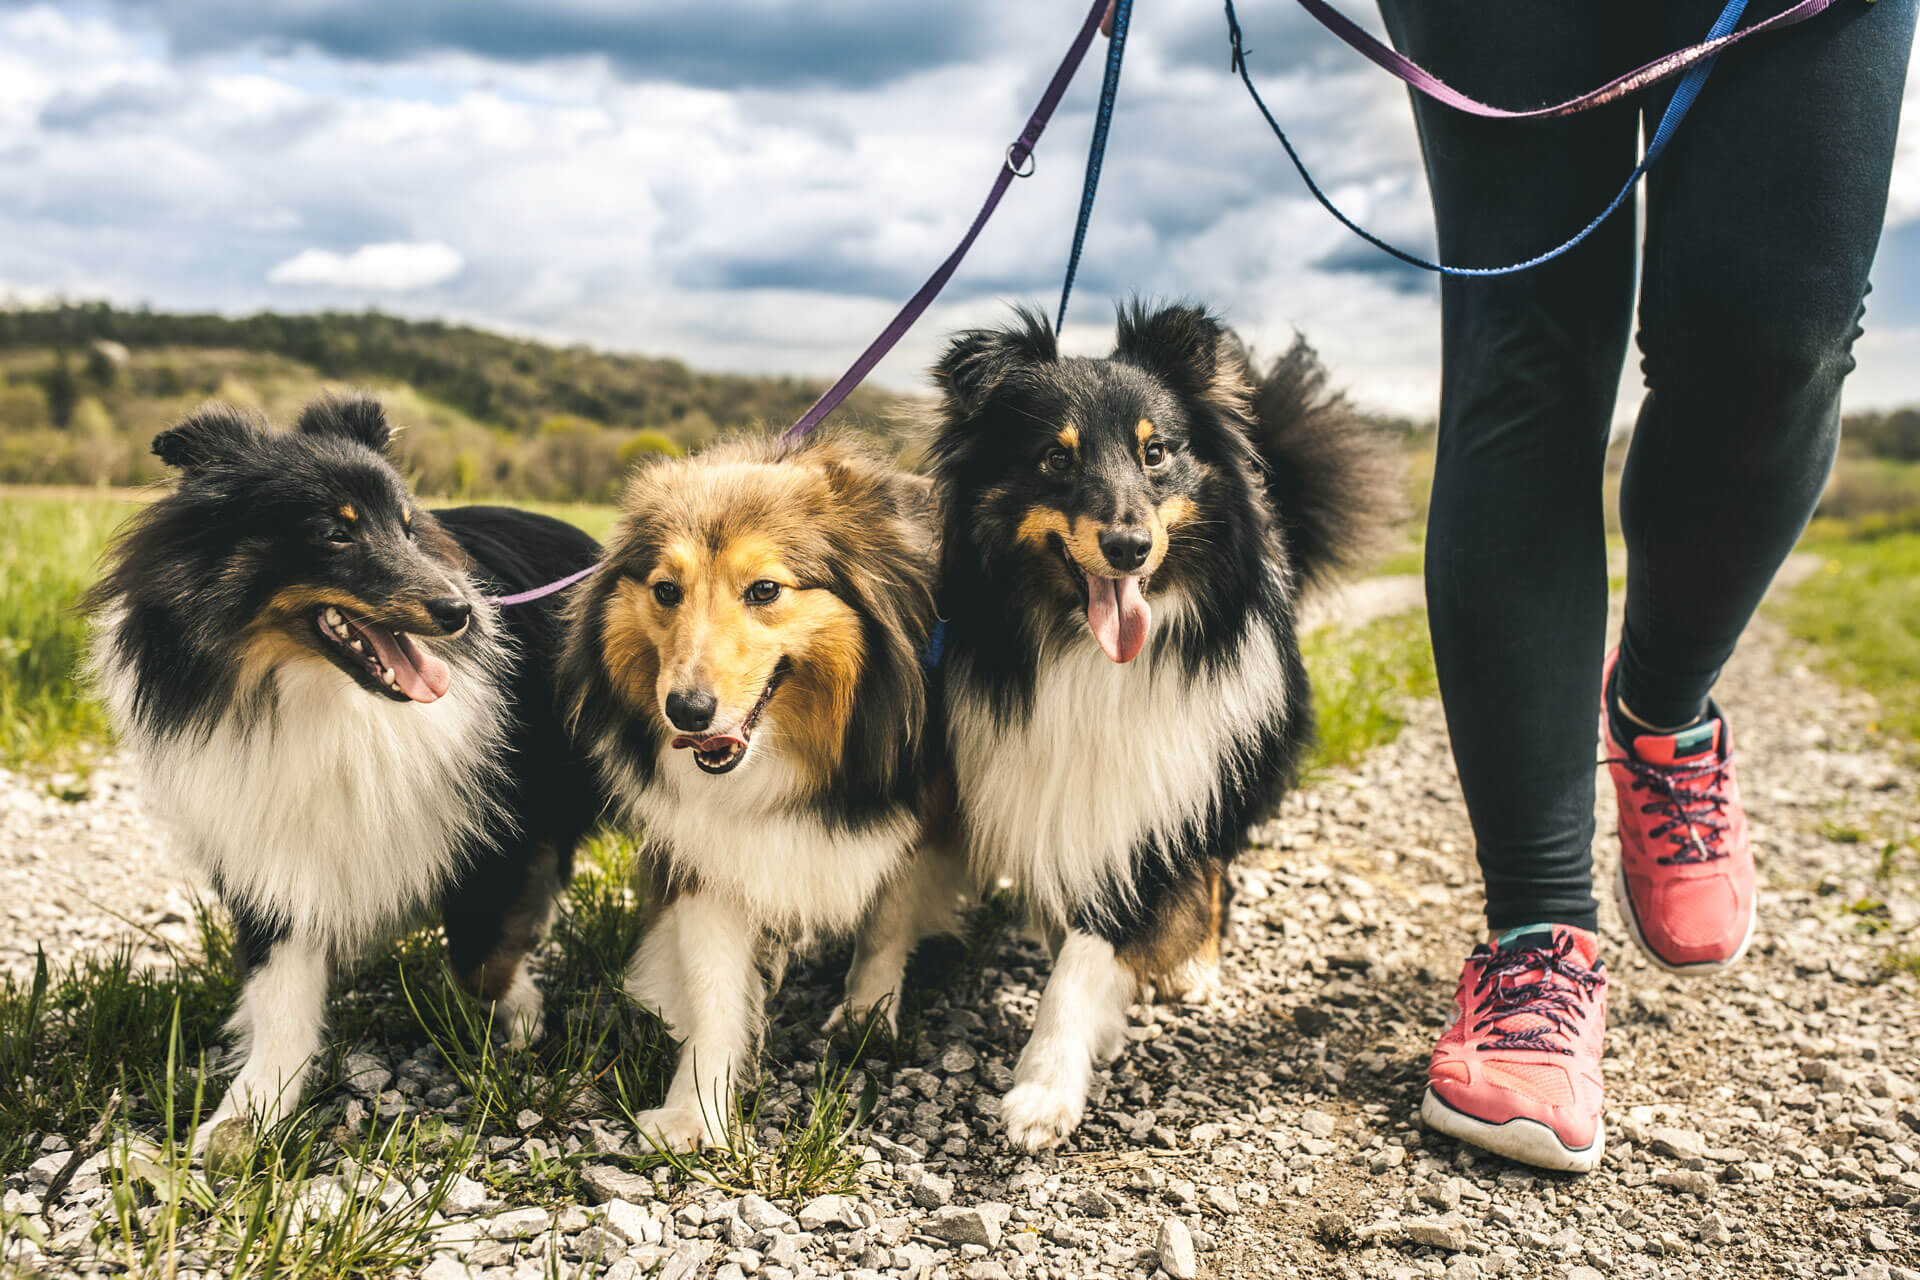 How to become a professional dog walker in 3 easy steps